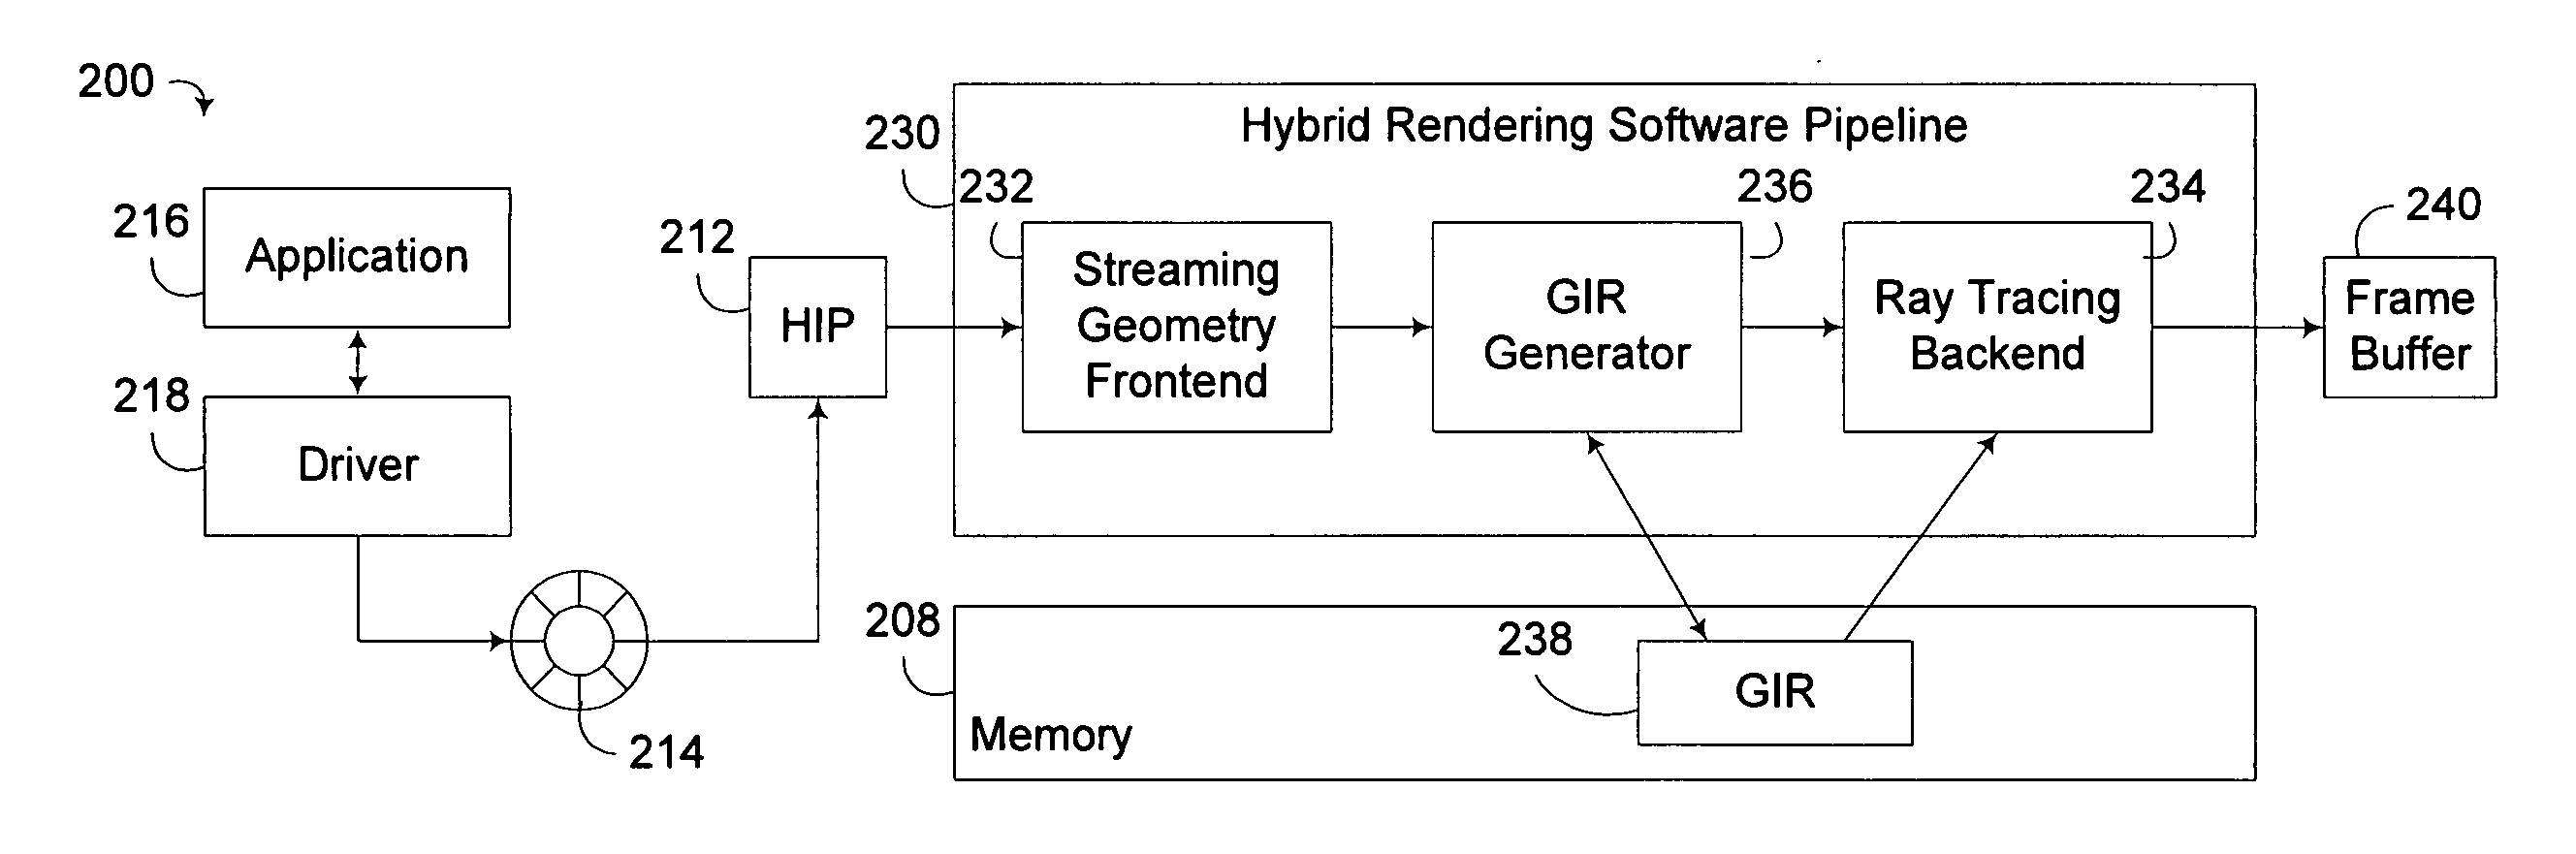 Hybrid rendering of image data utilizing streaming geometry frontend interconnected to physical rendering backend through dynamic accelerated data structure generator